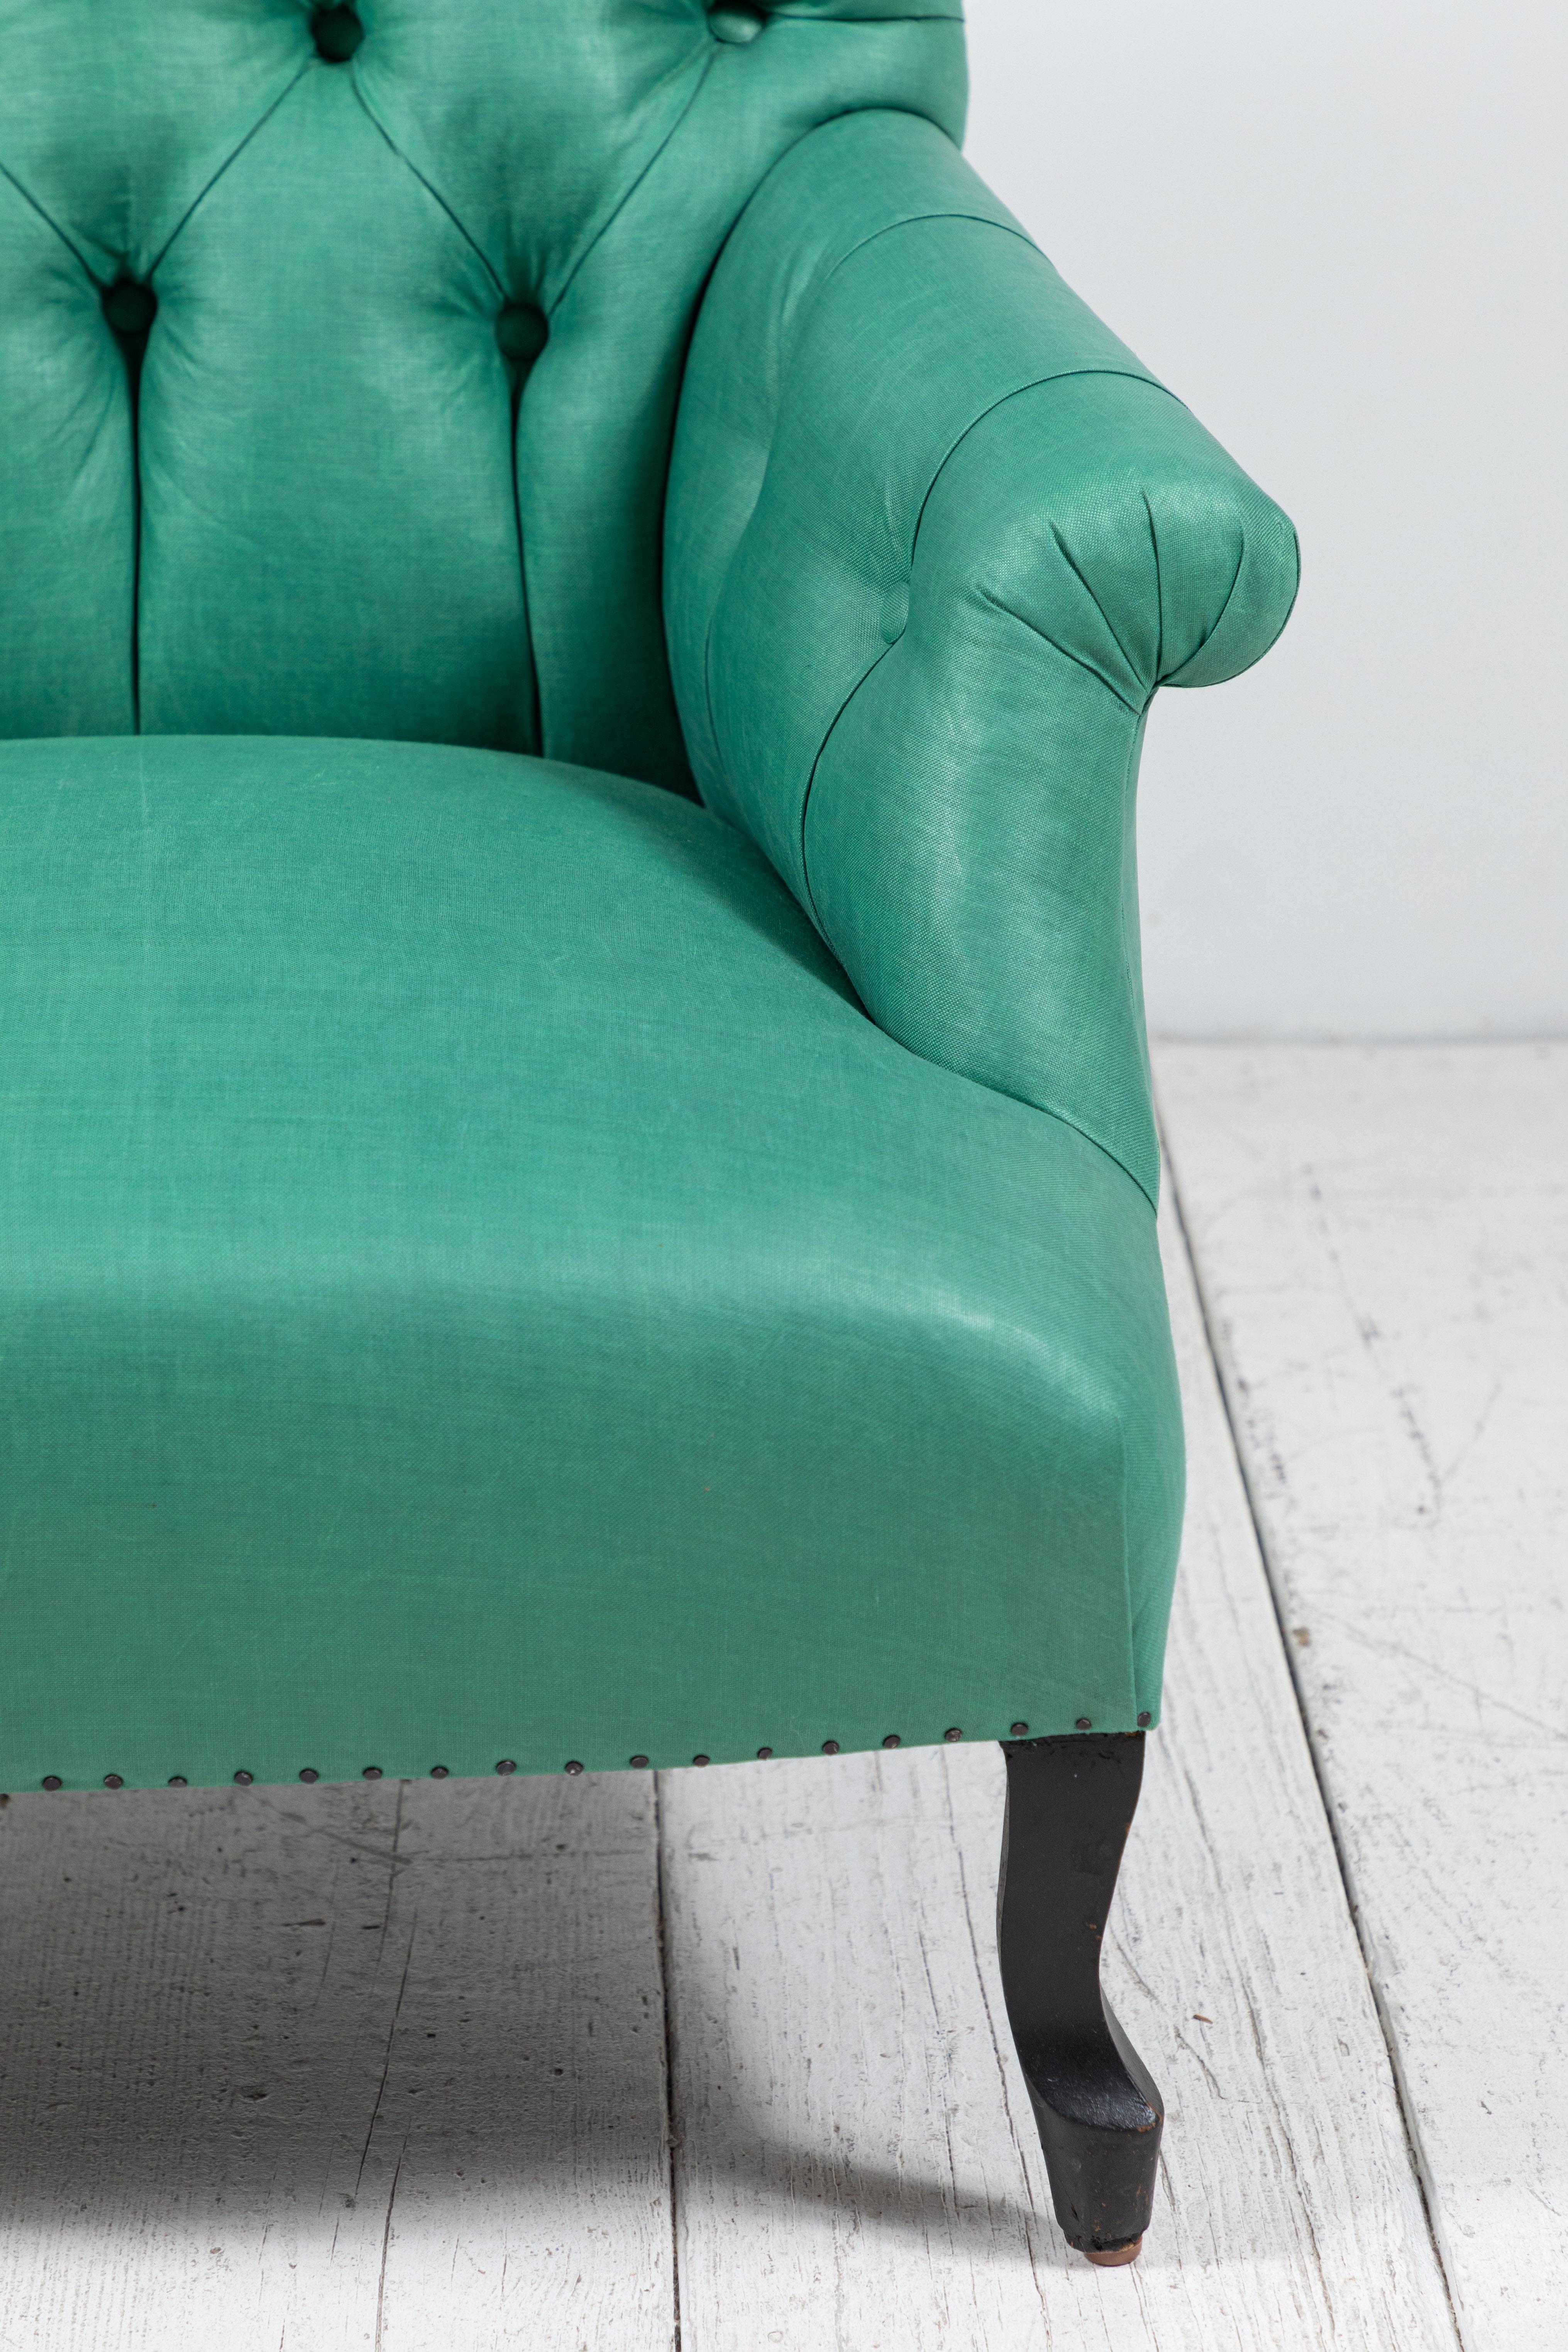 Pair of French tufted club chairs newly upholstered in classic green beetled linen, the fabric is from British Company 36 Bourne Street. Cabriole legs has original finish.